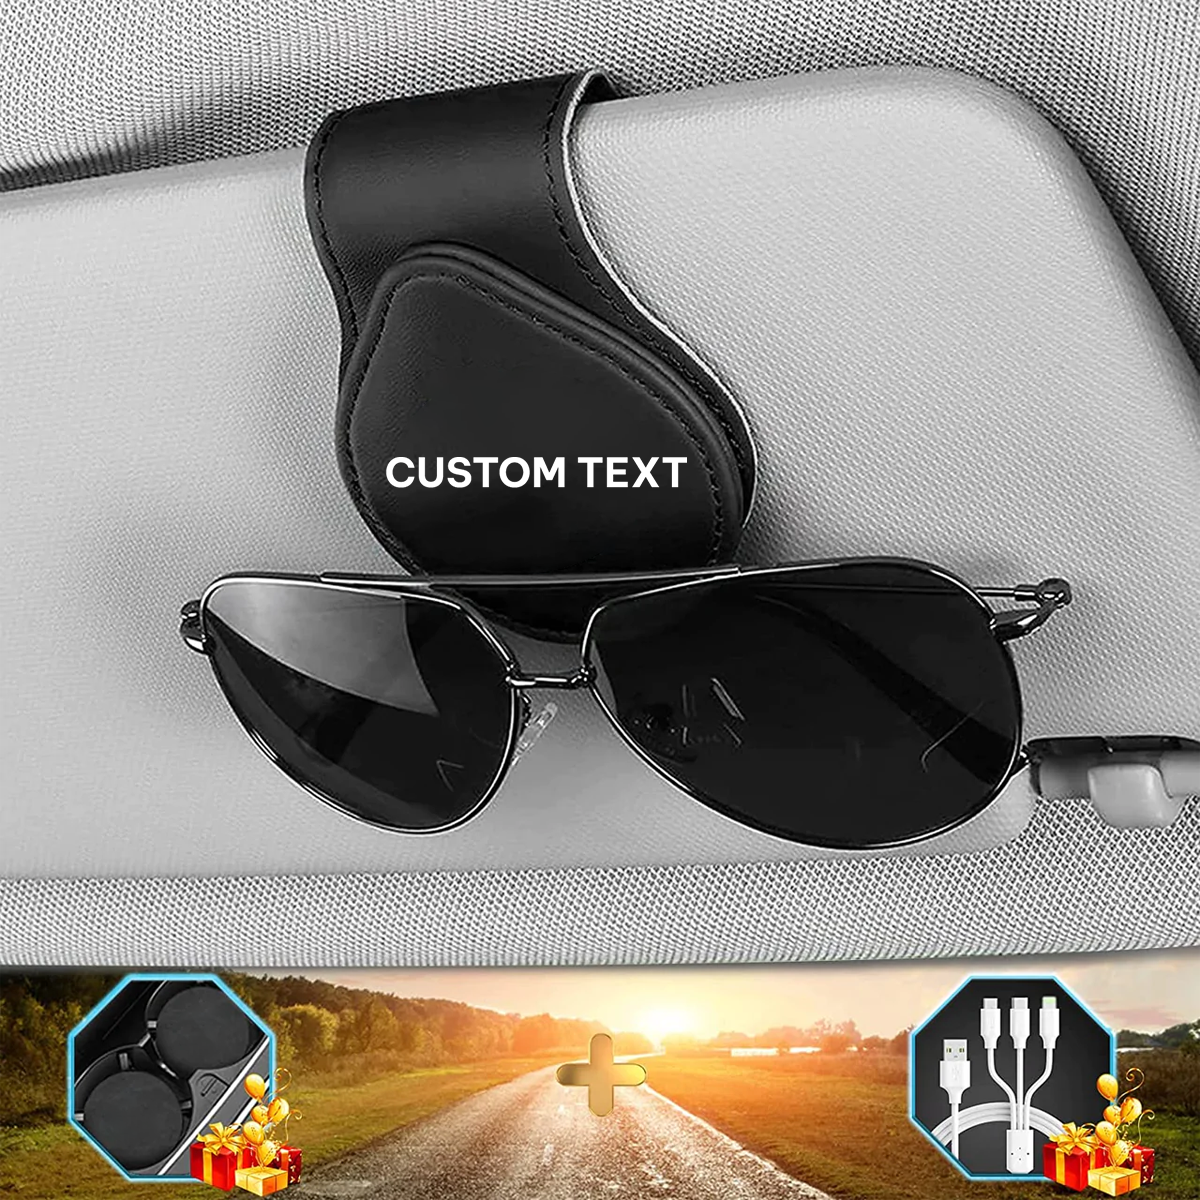 Custom Text and Logo Sunglasses Holder for Car Visor Clips, Fit with MG, Leather Magnet Adsorption Visor Accessories Car Organizer for Storing Glasses Tickets Eyeglasses Hanger - Delicate Leather